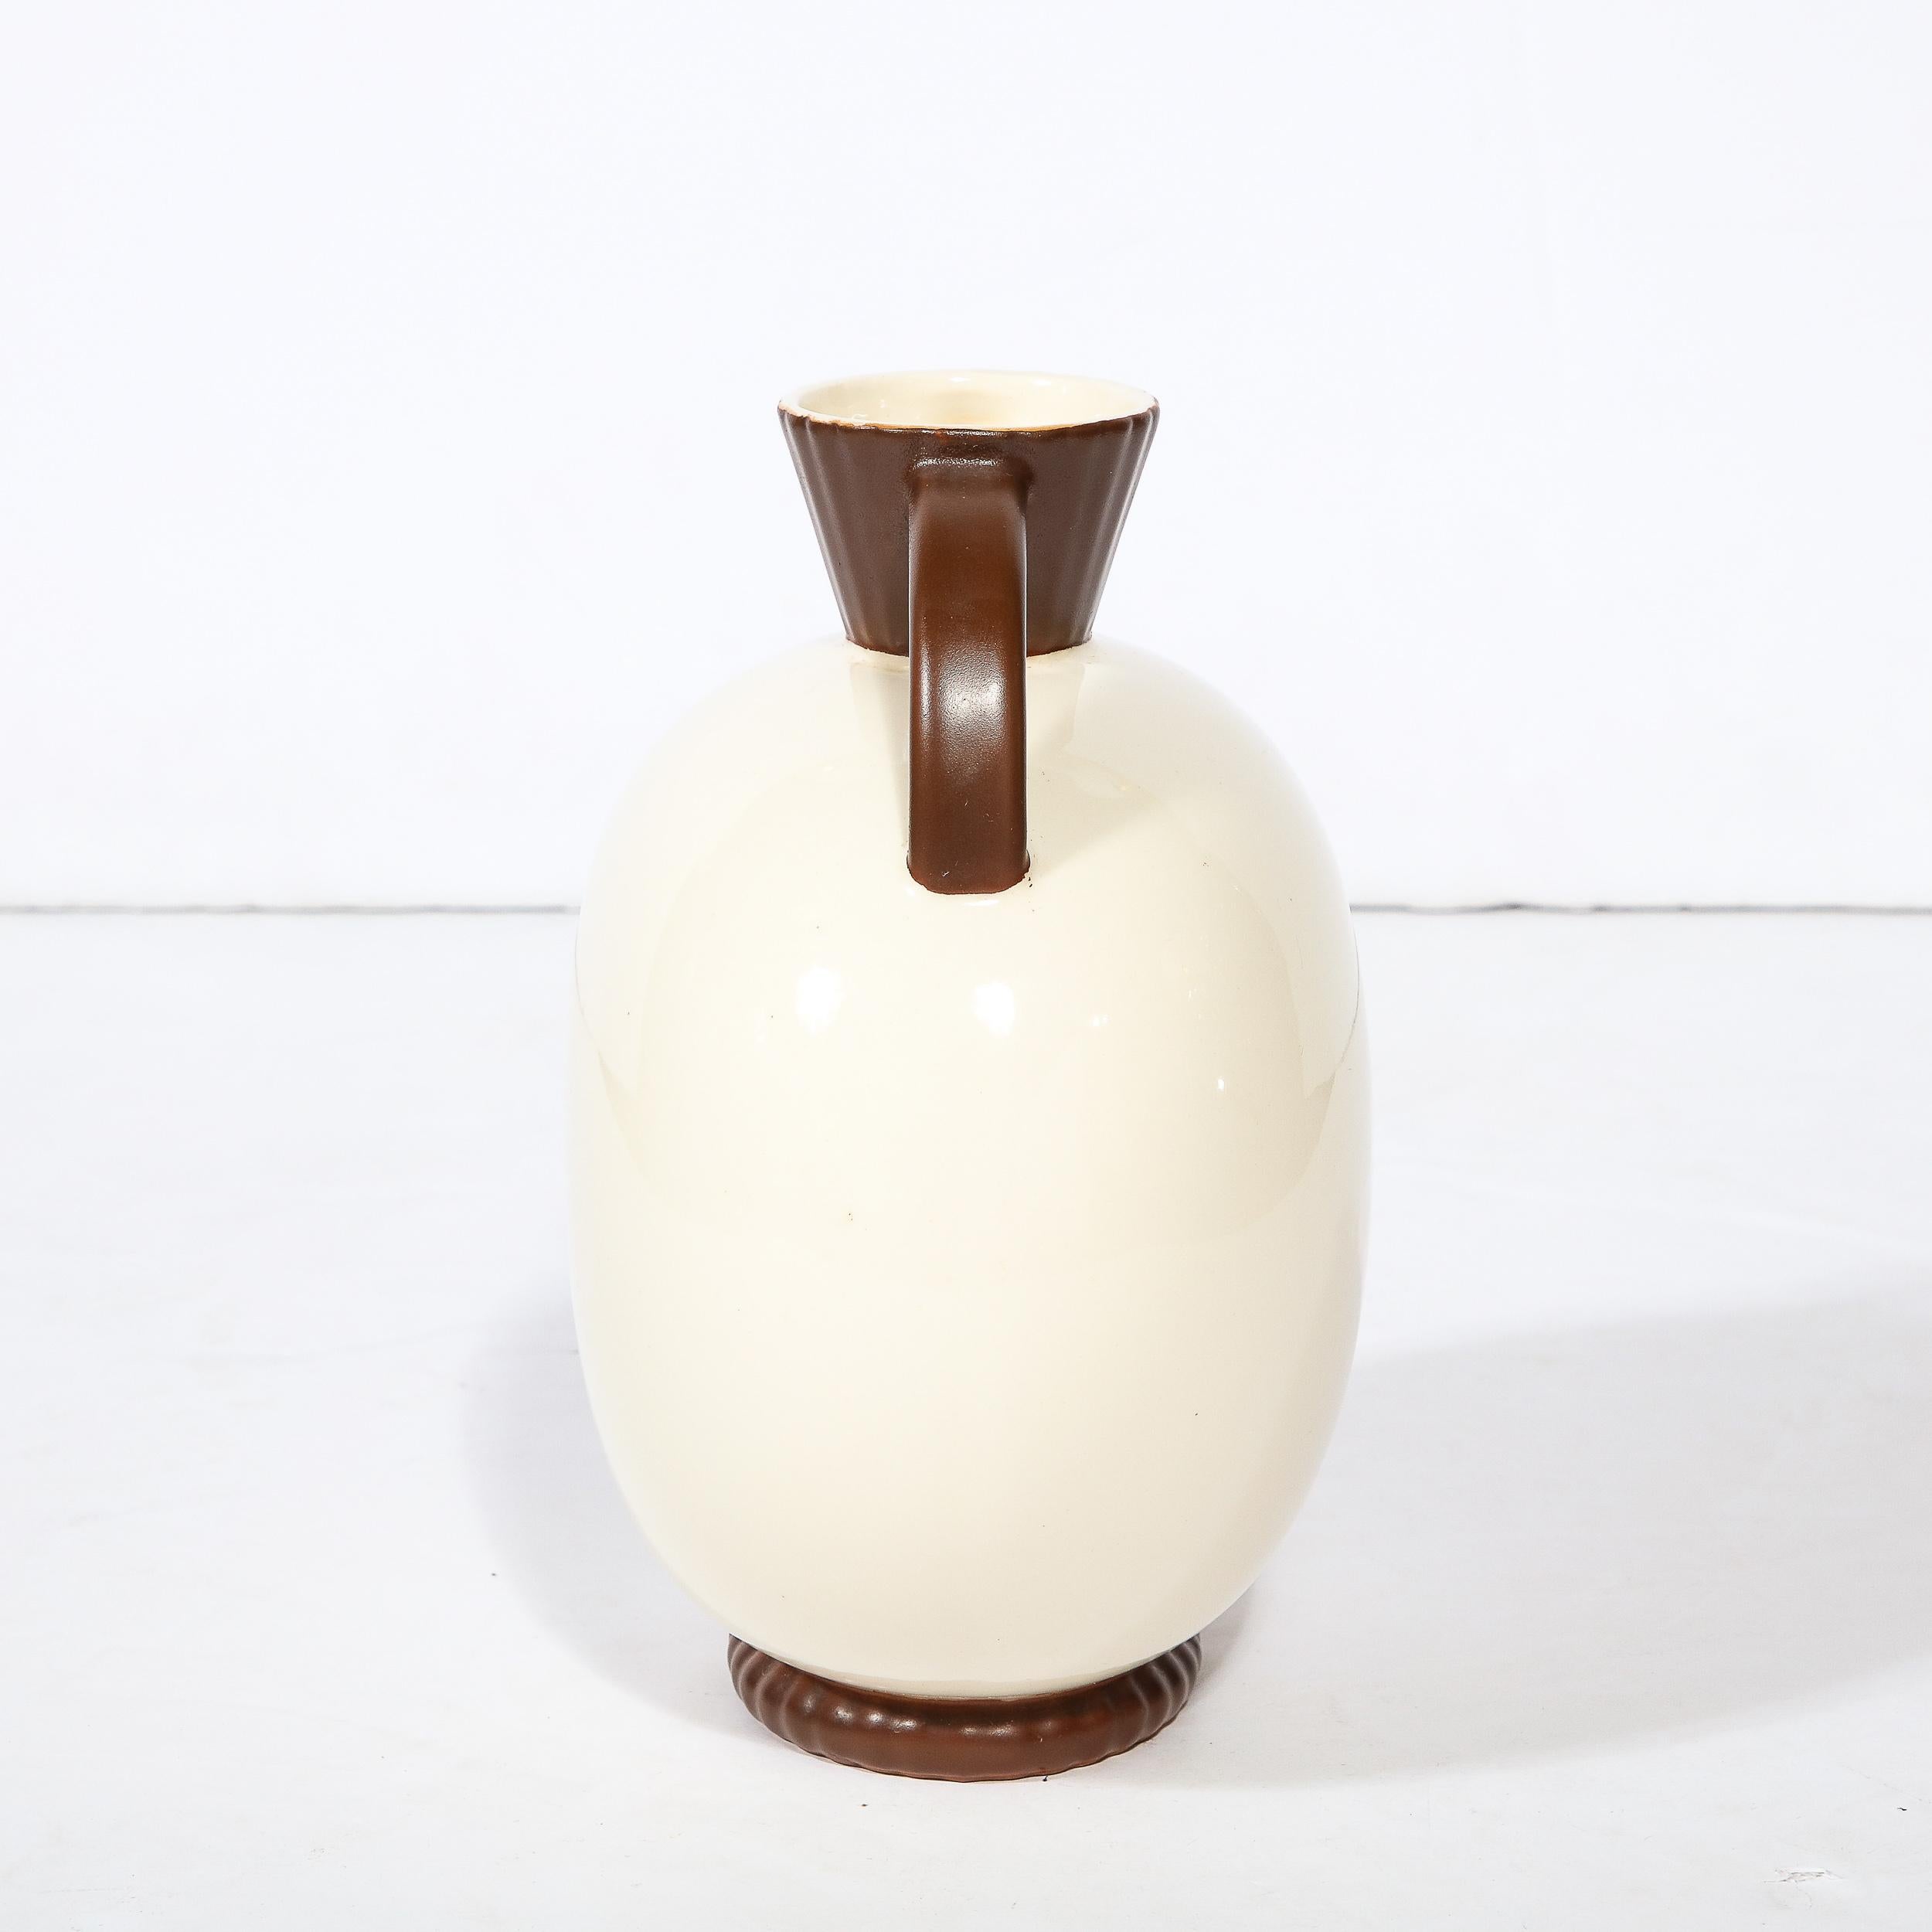 Czecholovakian Art Deco Hand Crafted Cream and Umber Ceramic Vase by Royal Crown In Excellent Condition For Sale In New York, NY